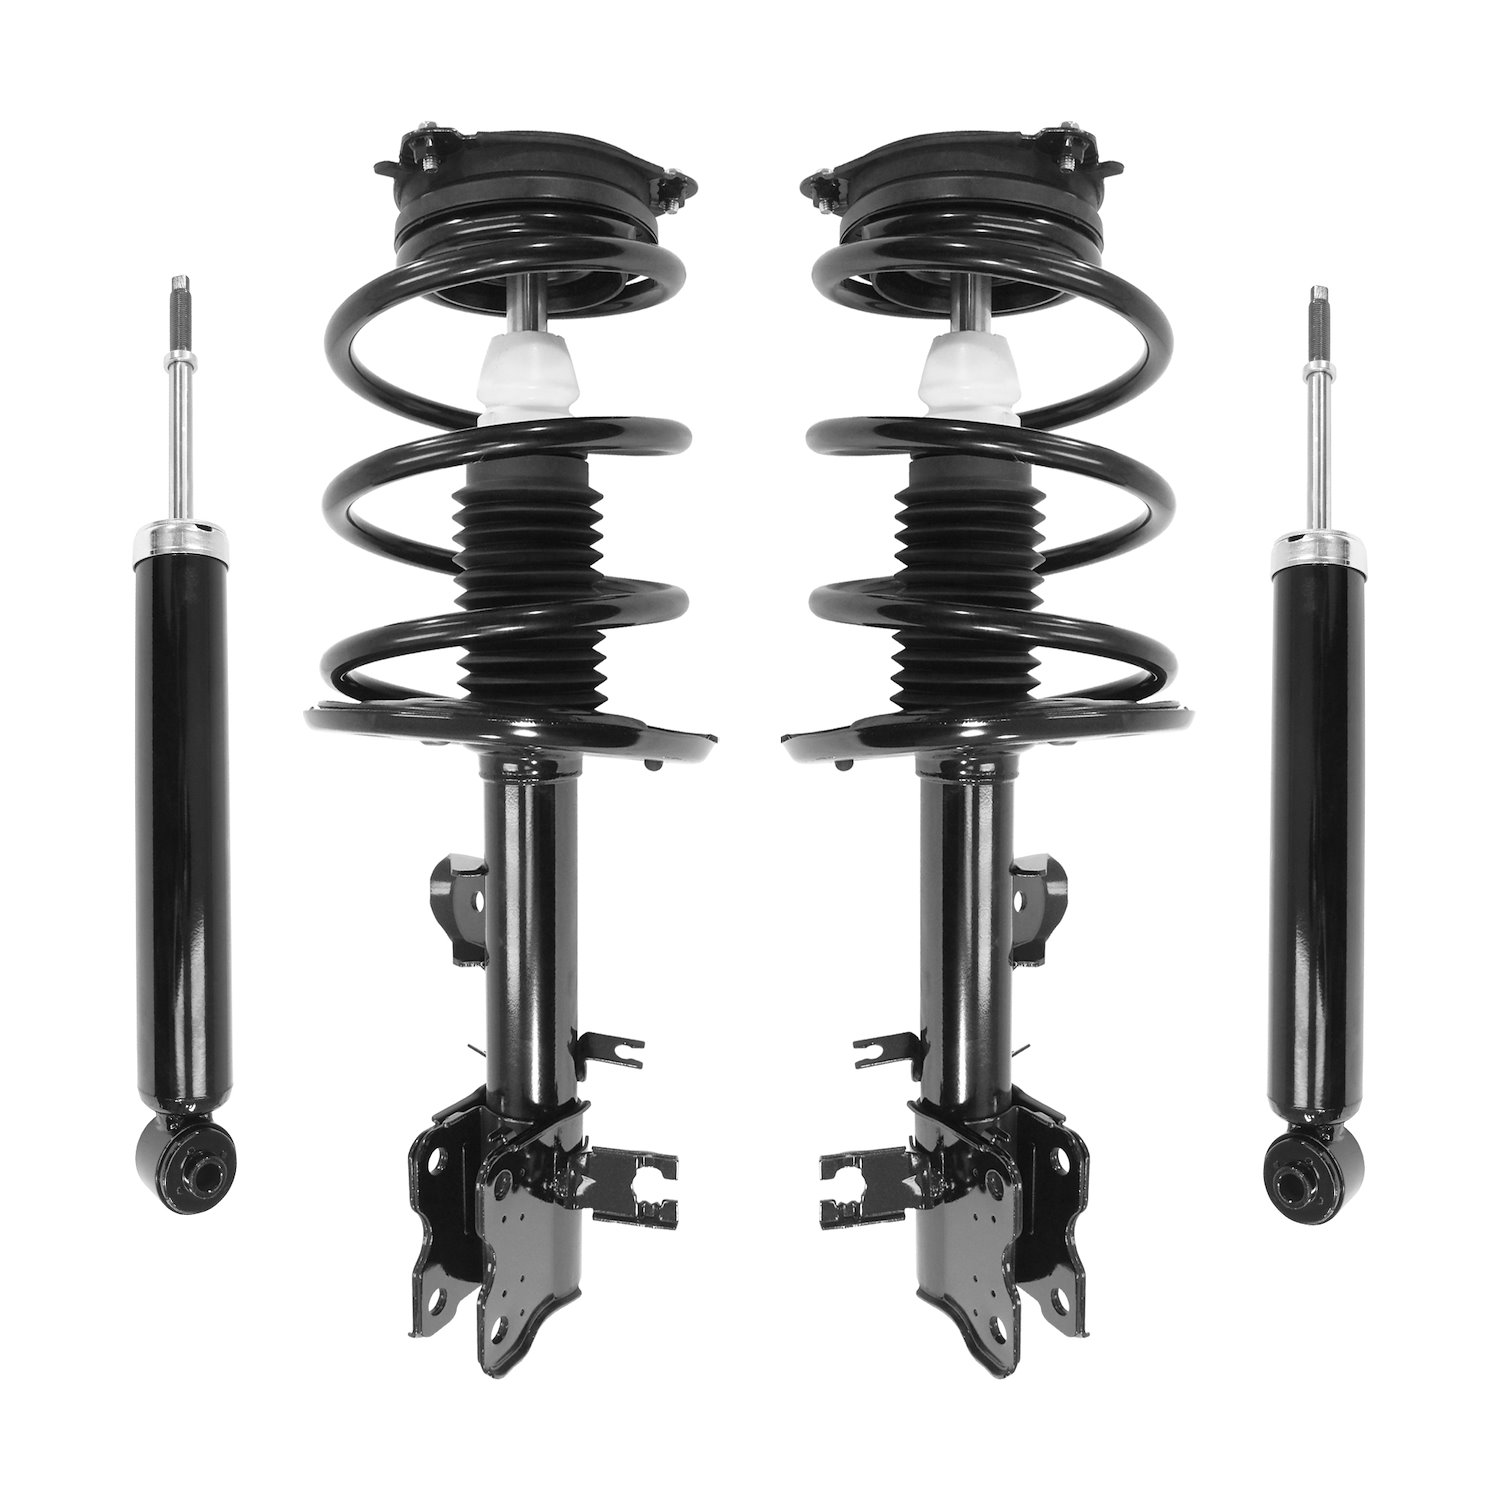 4-11487-255430-001 Front & Rear Suspension Strut & Coil Spring Assembly Fits Select Nissan Quest